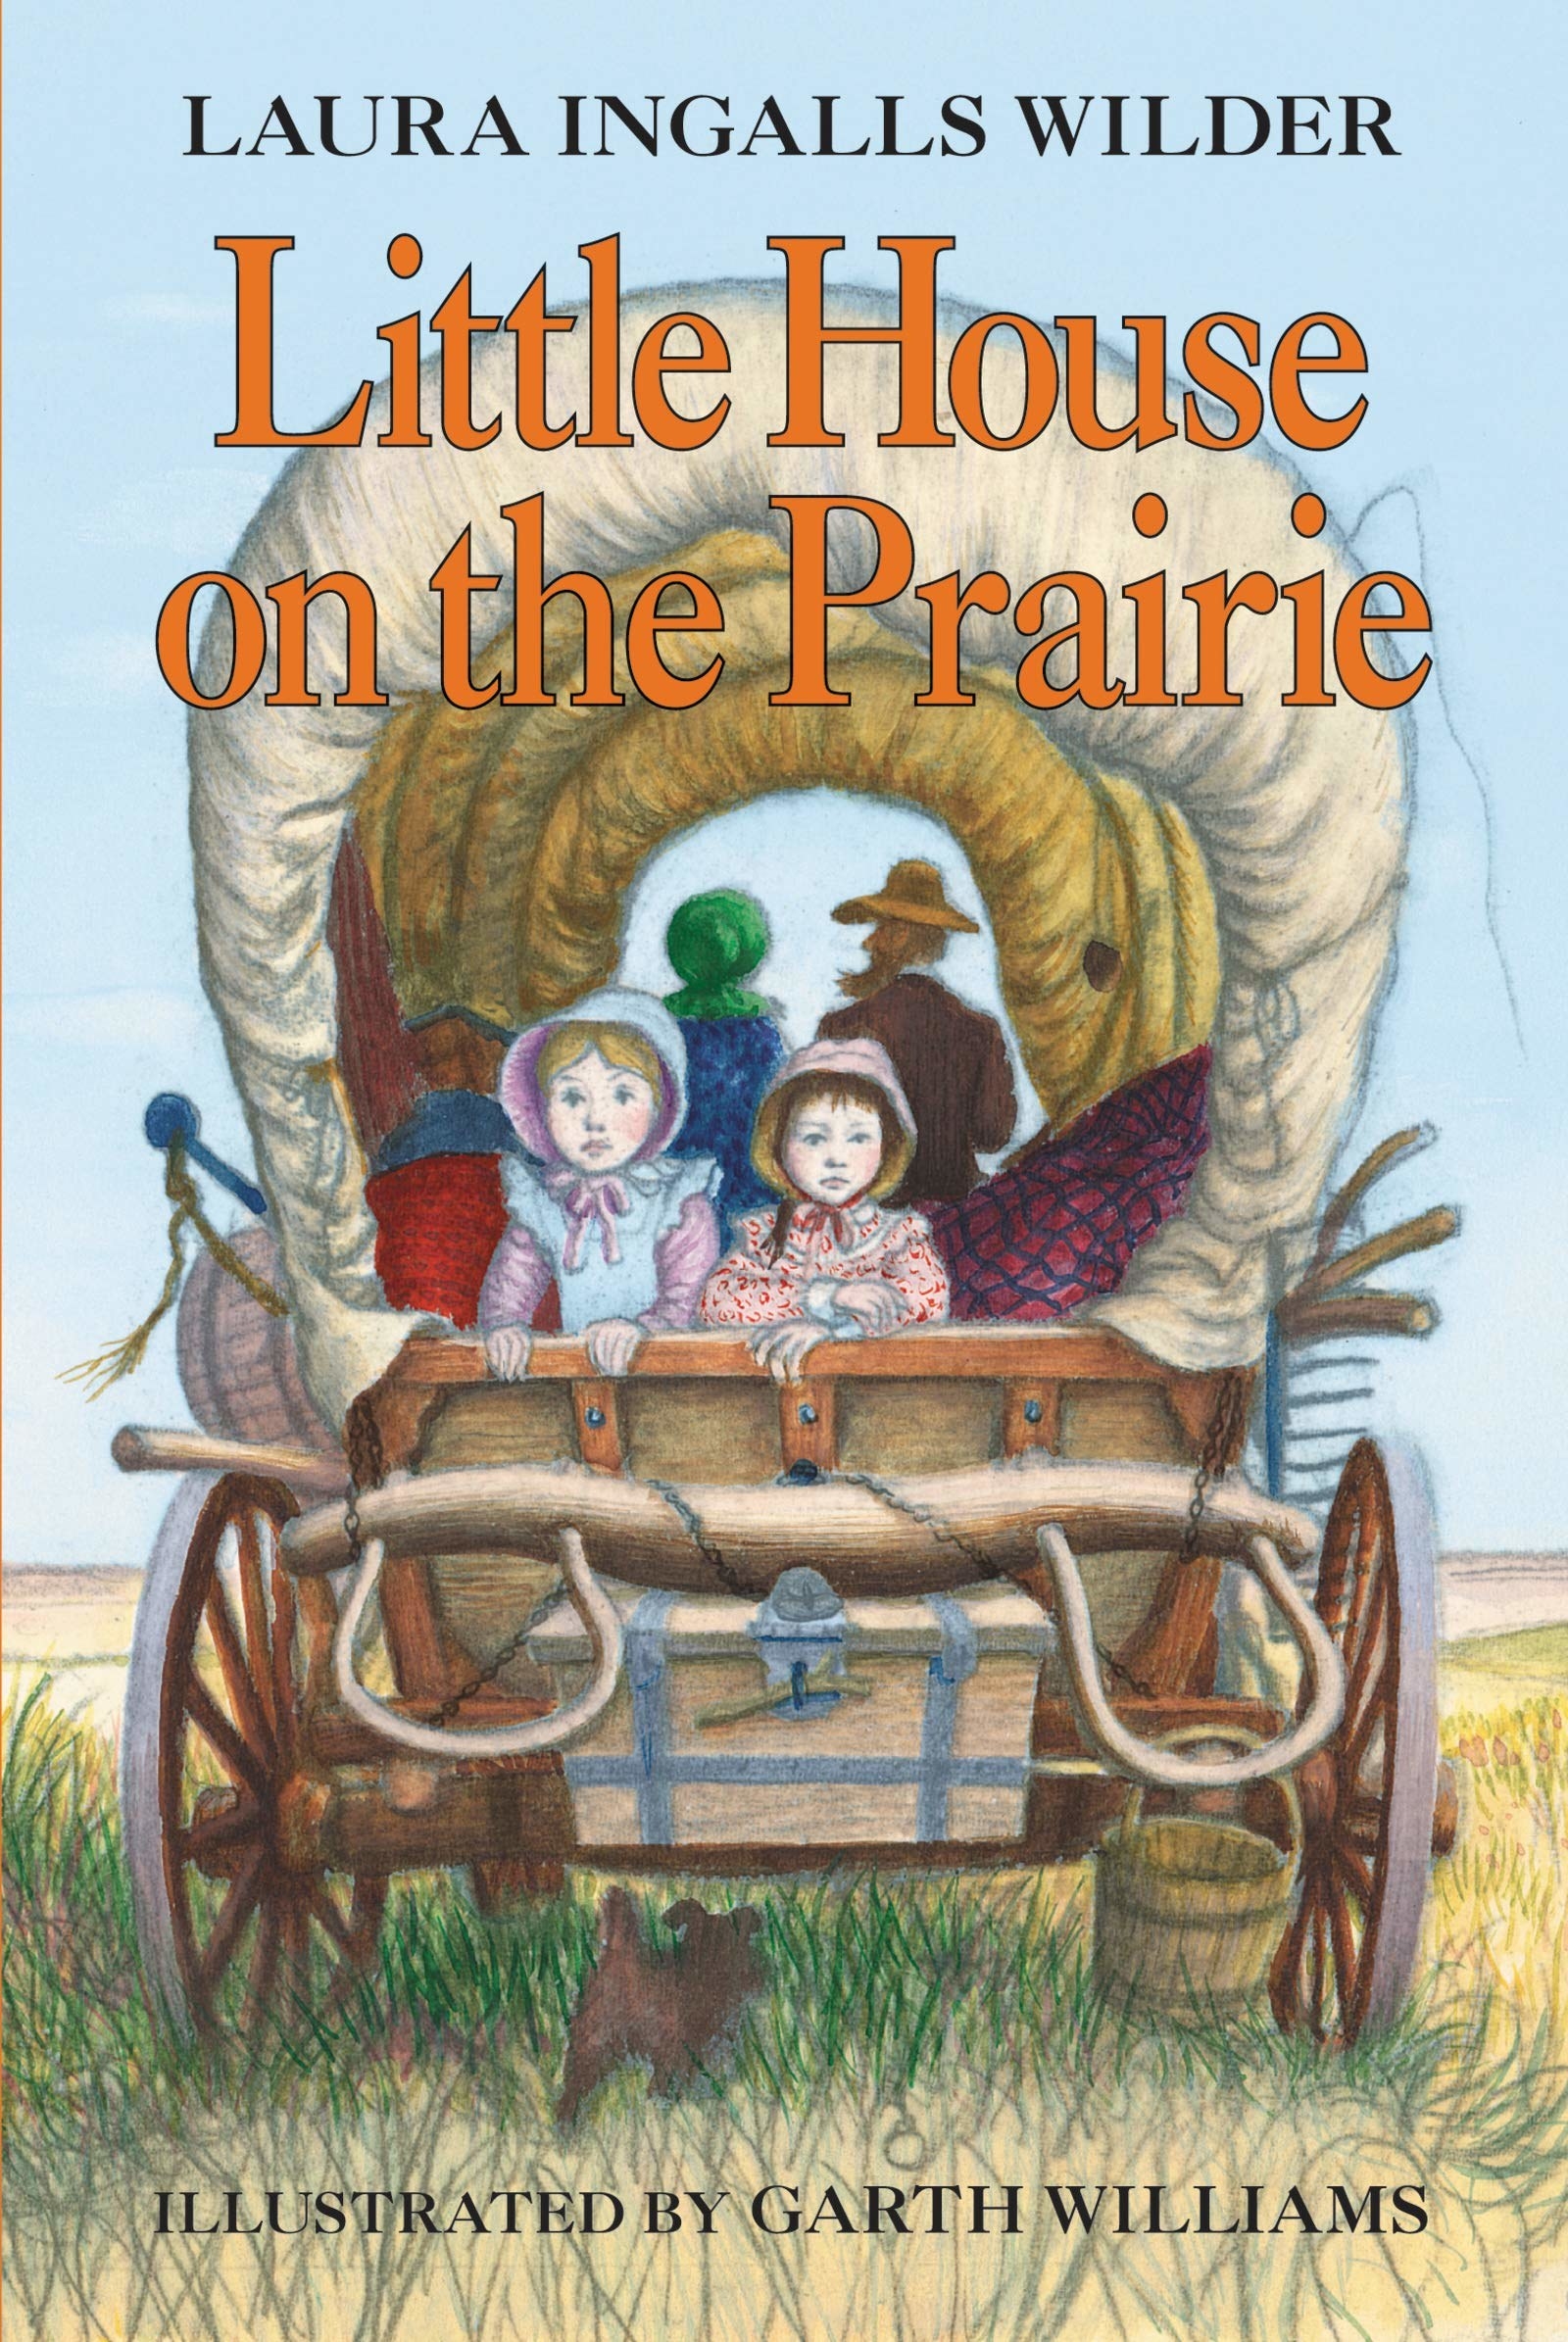 The cover of &quot;The Little House On The Prairie&quot; by Laura Ingalls Wilder.